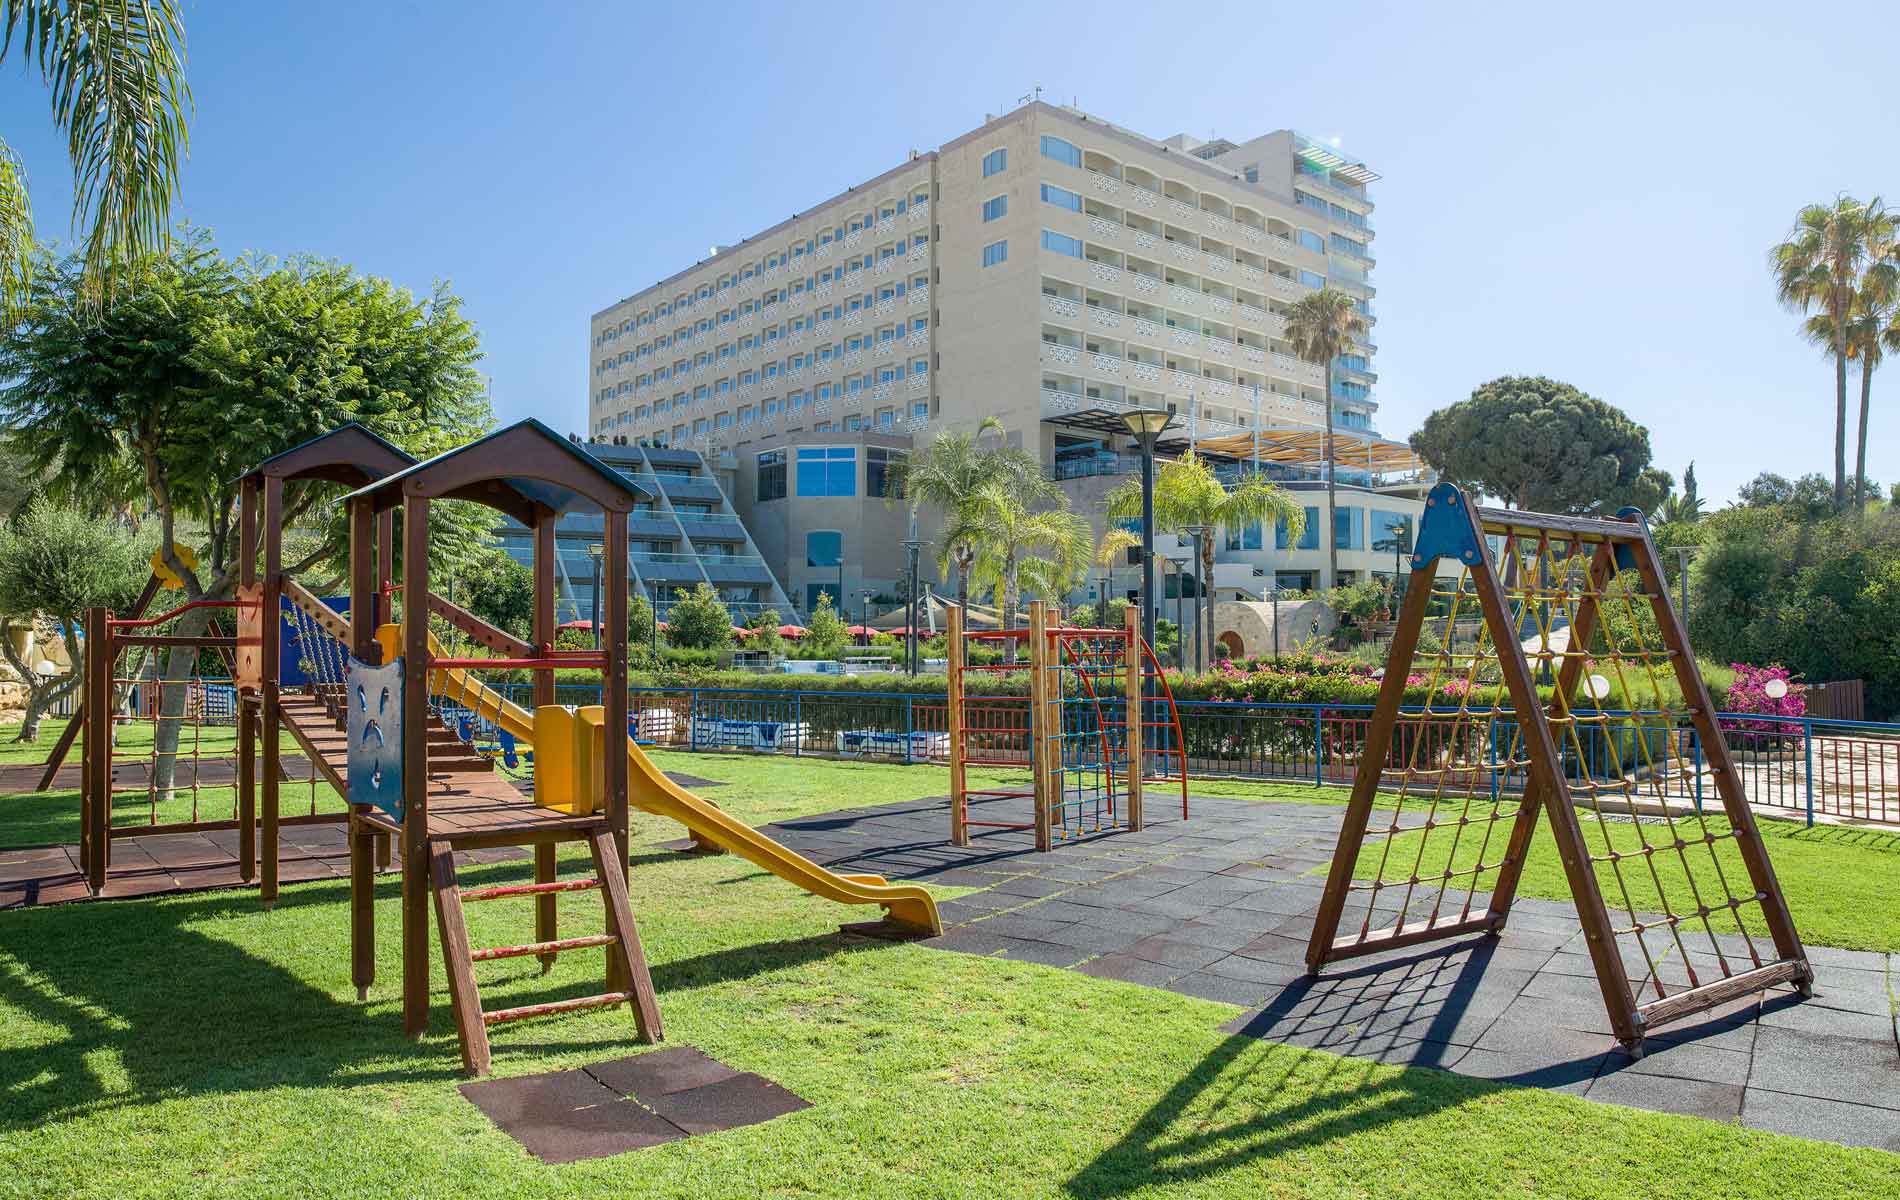 The kids' playground on-site at St Raphael Resort, one of the best all-inclusive resorts in Cyprus for families.